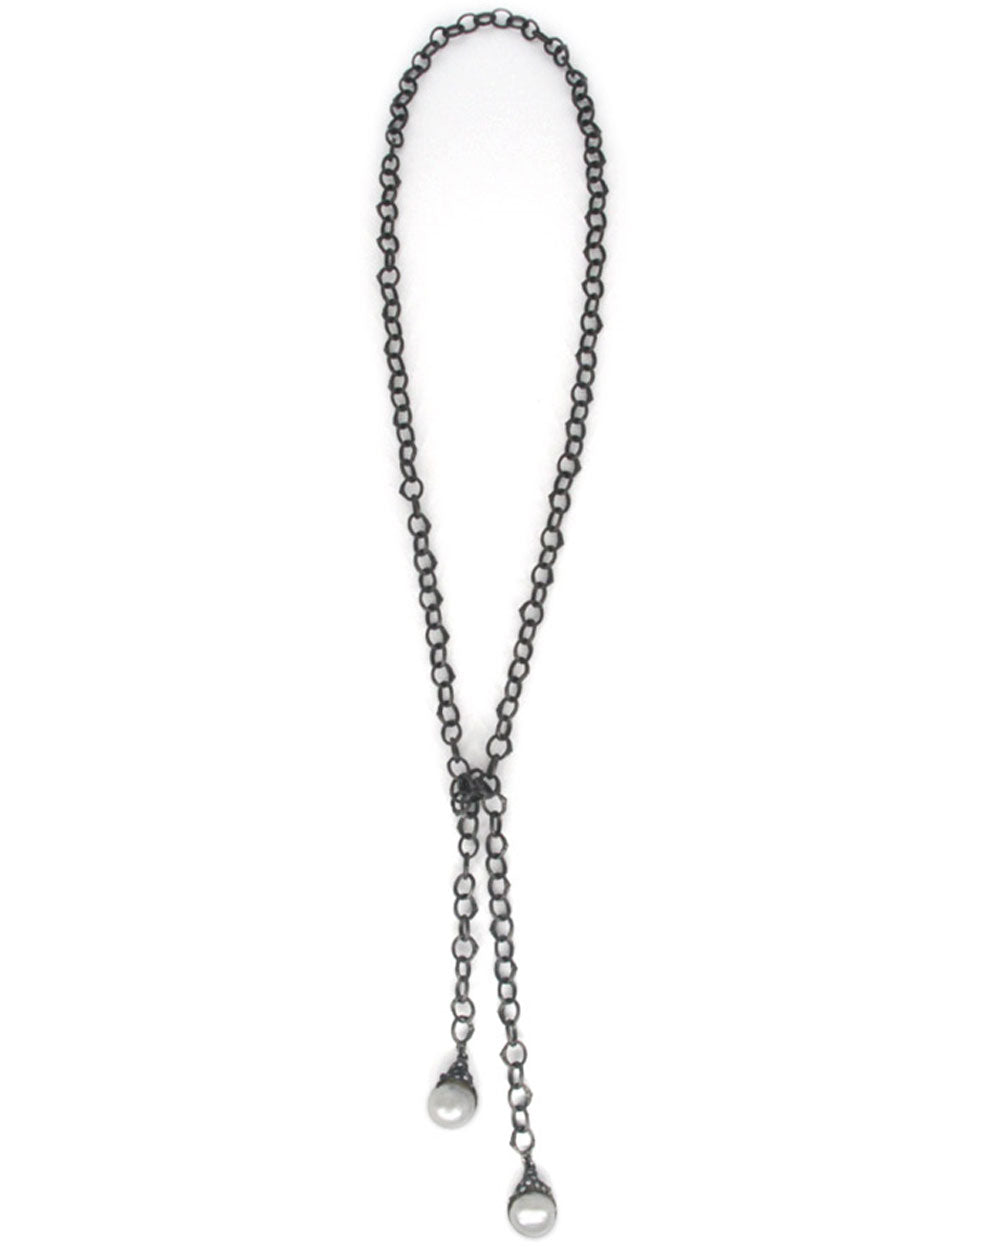 Silver South Sea Pearl Diamond Link Chain Necklace